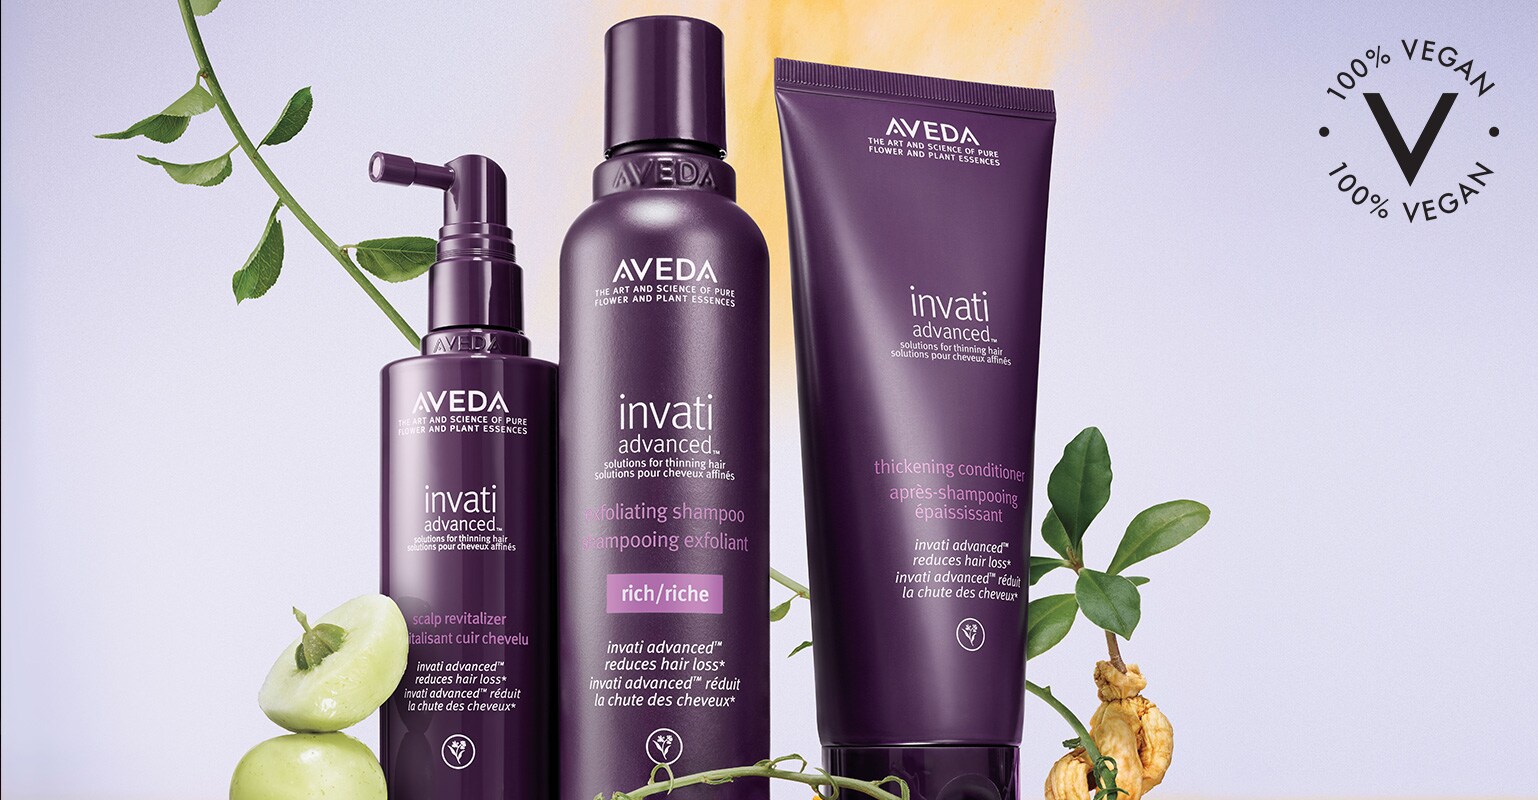 Reduce hair loss by 53 % with invati advanced 3-step system